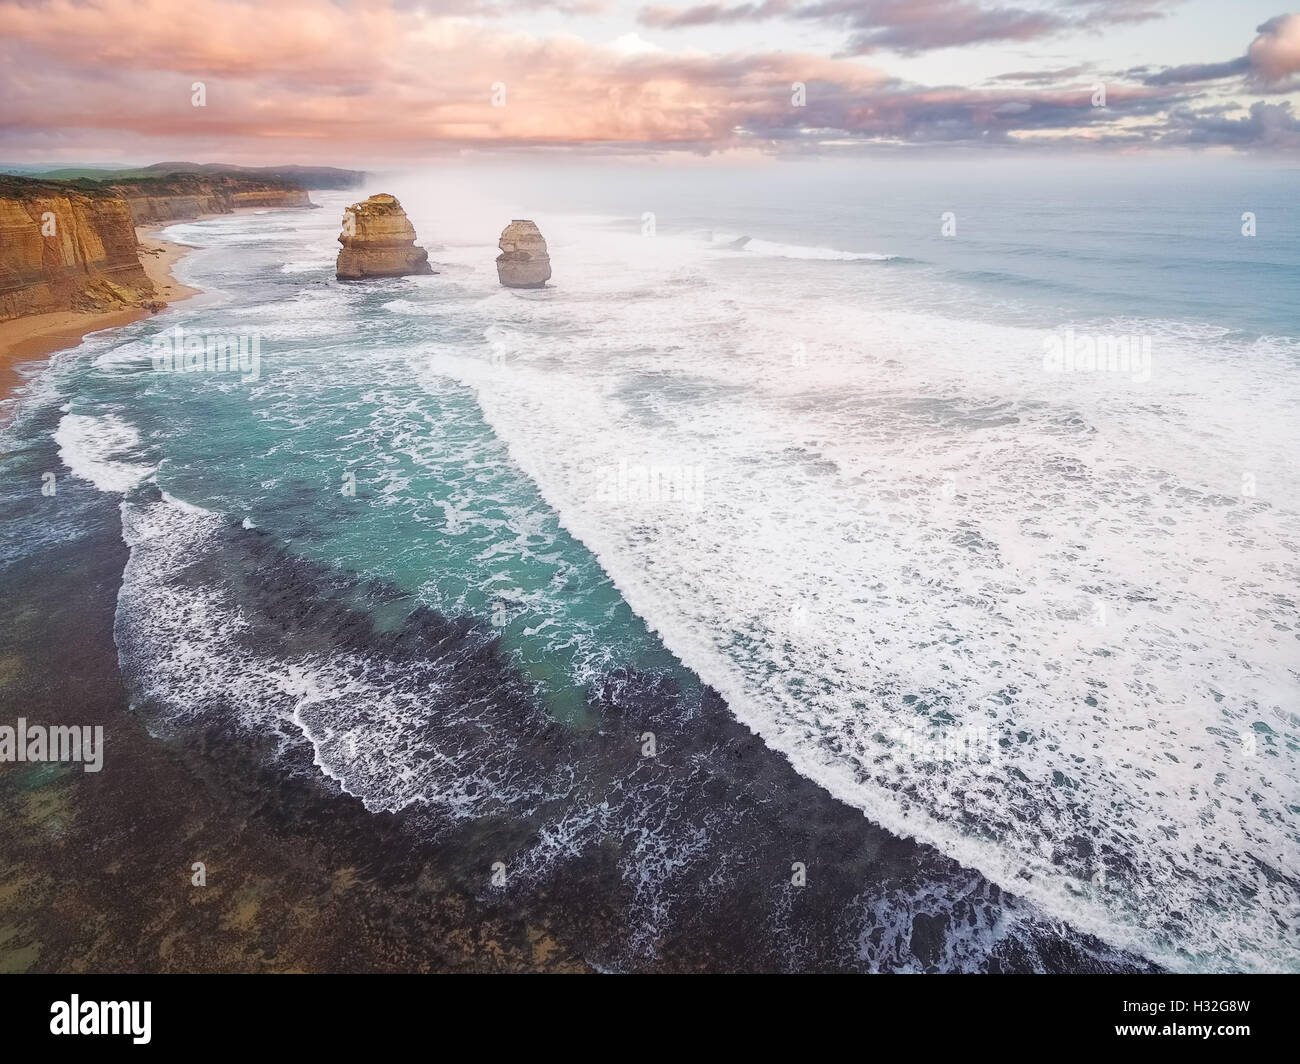 Aerial view of the Gog and Magog rock formations at sunset with breaking ocean waves Stock Photo